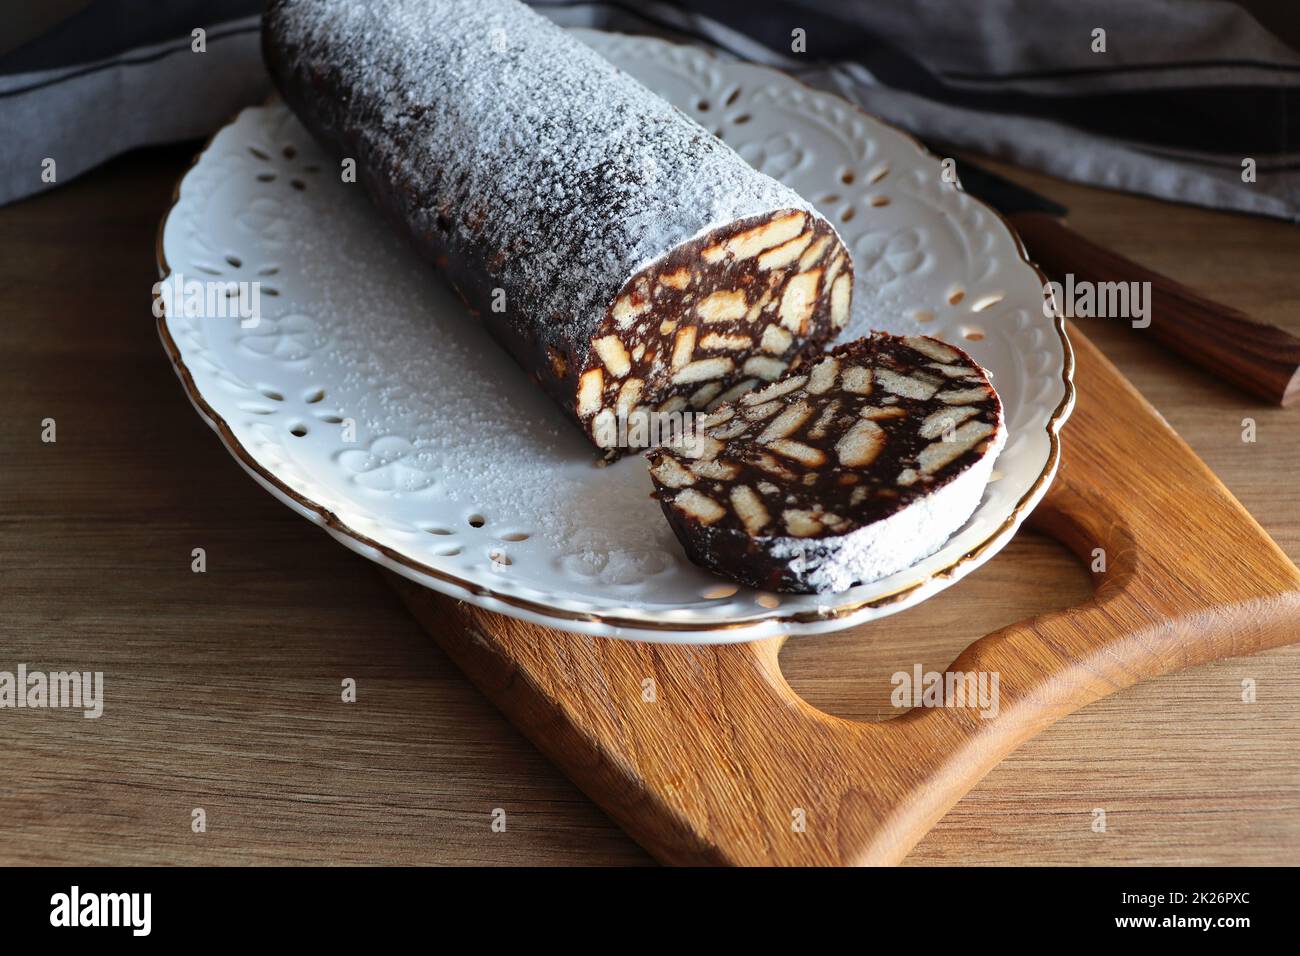 Lazy cake or mosaic cake . Homemade no bake chocolate biscuit cake on a wooden table Stock Photo